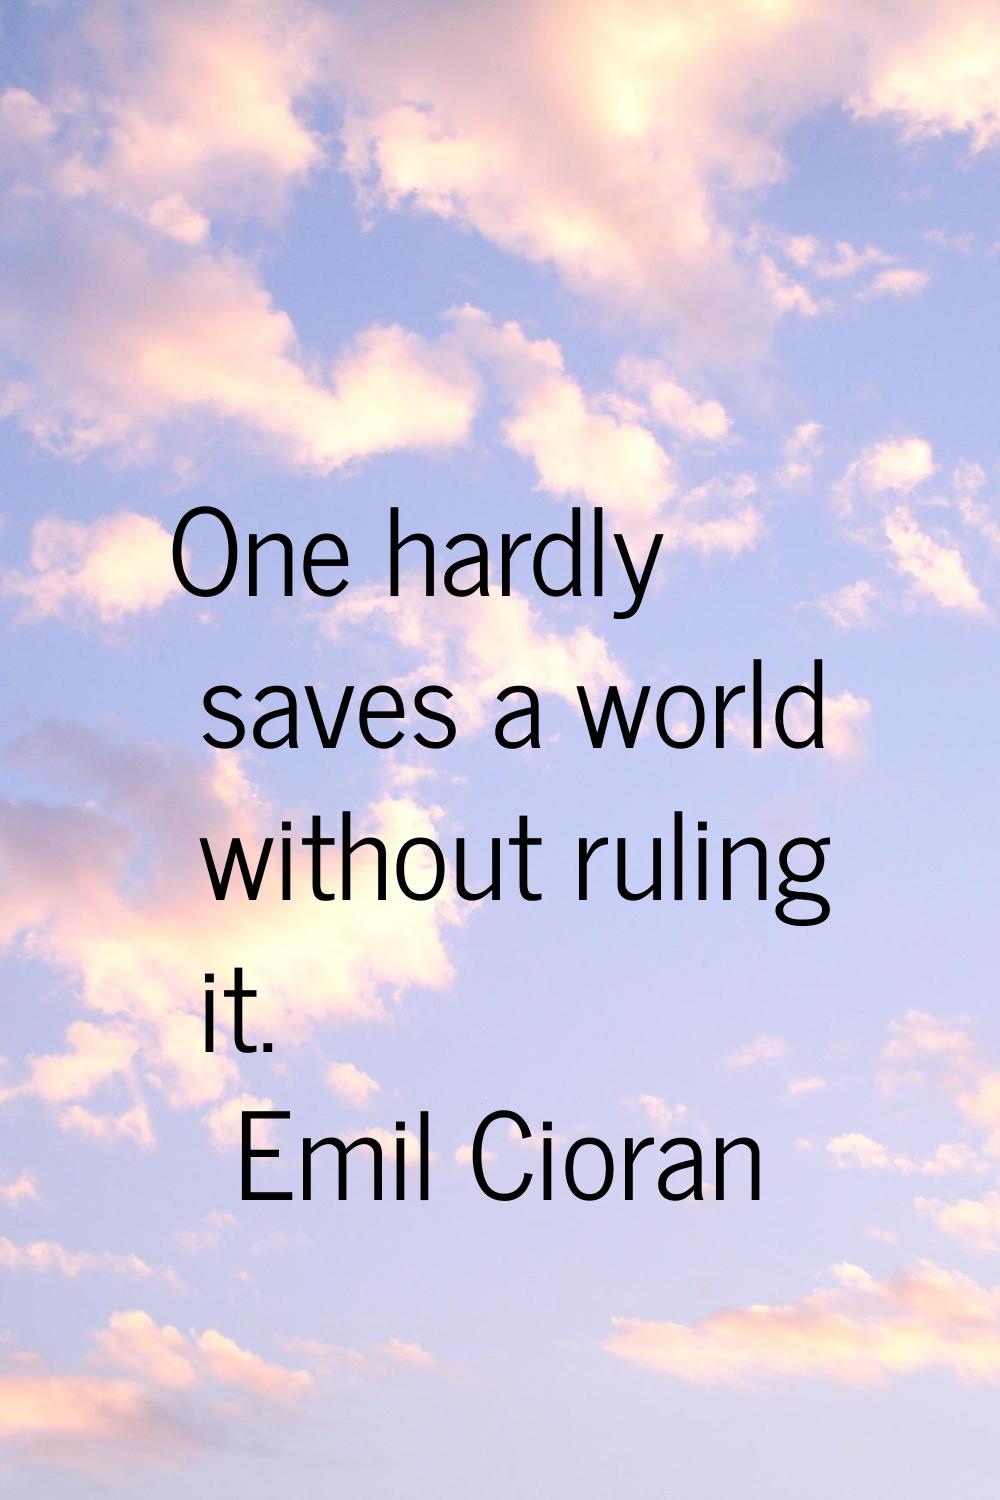 One hardly saves a world without ruling it.